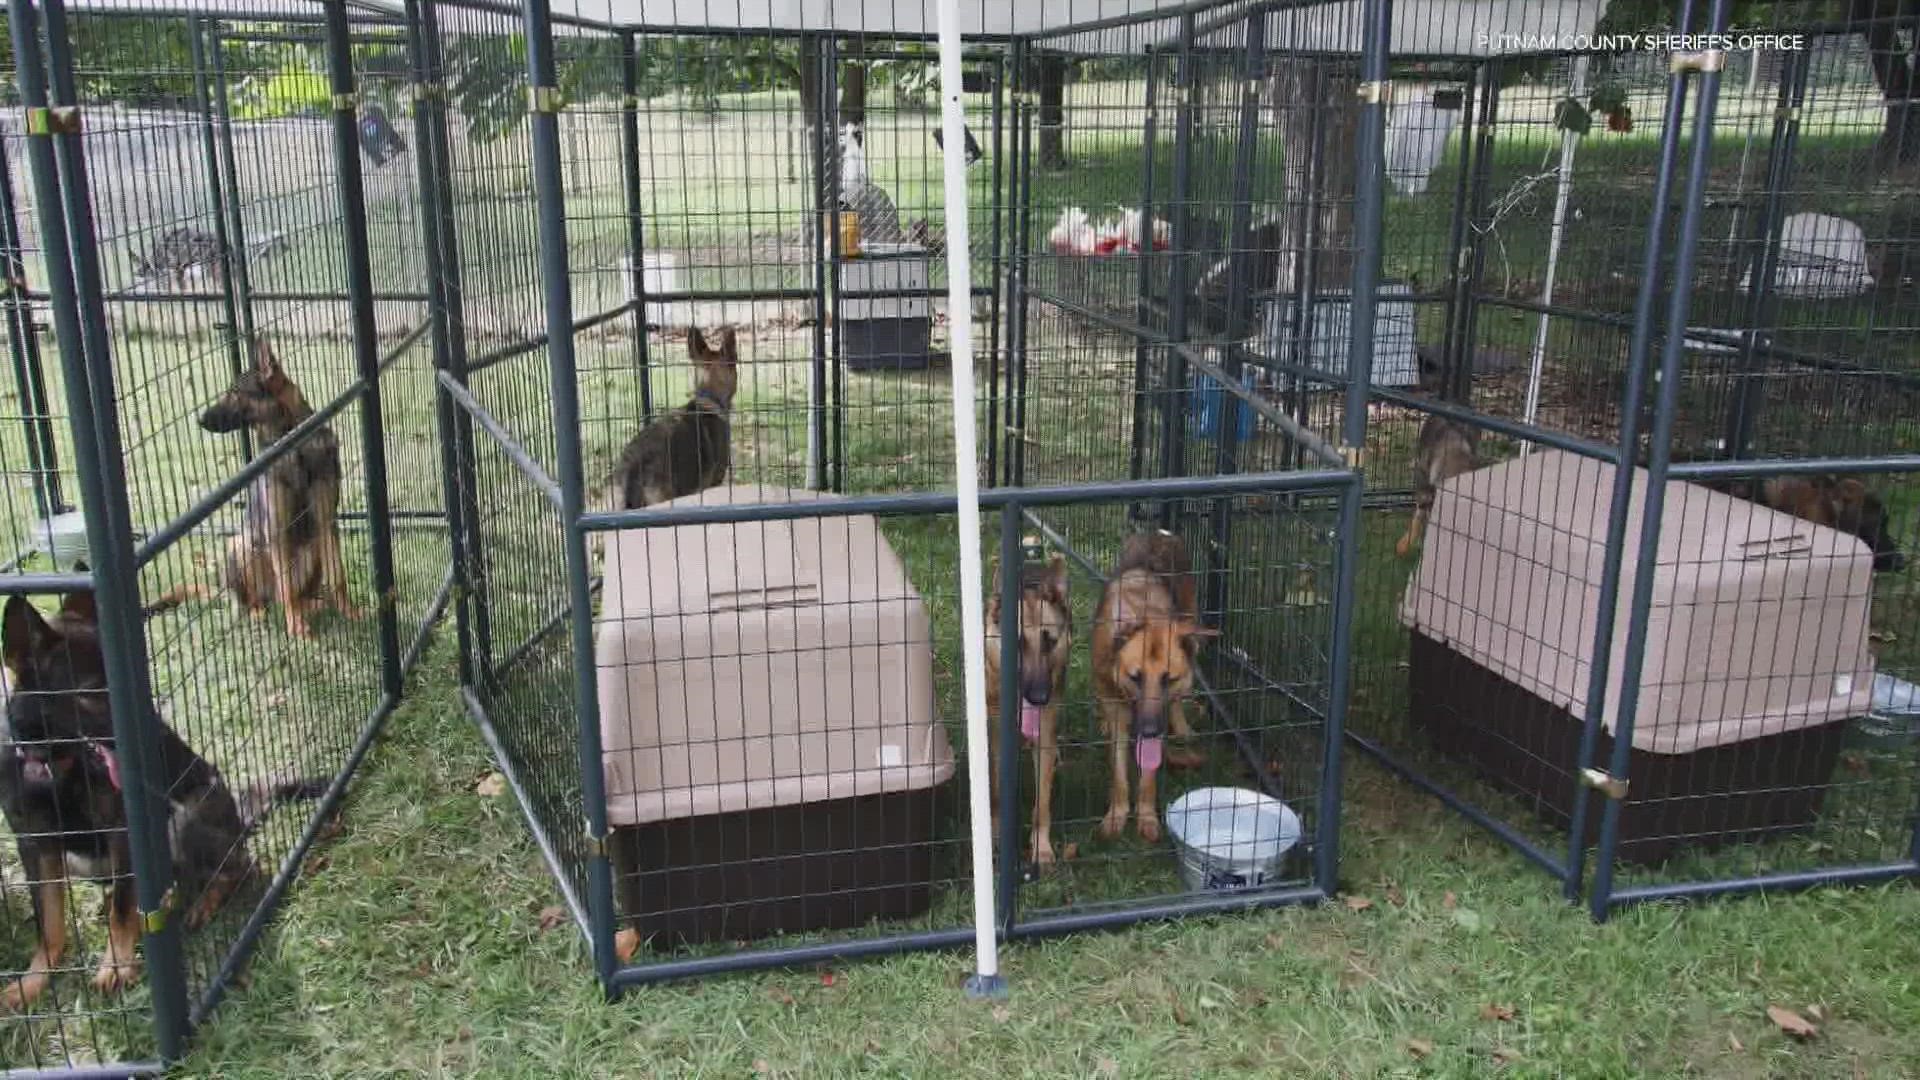 At least 30 German shepherds found in deplorable conditions were seized Friday by deputies and Animal Care and Control officers.